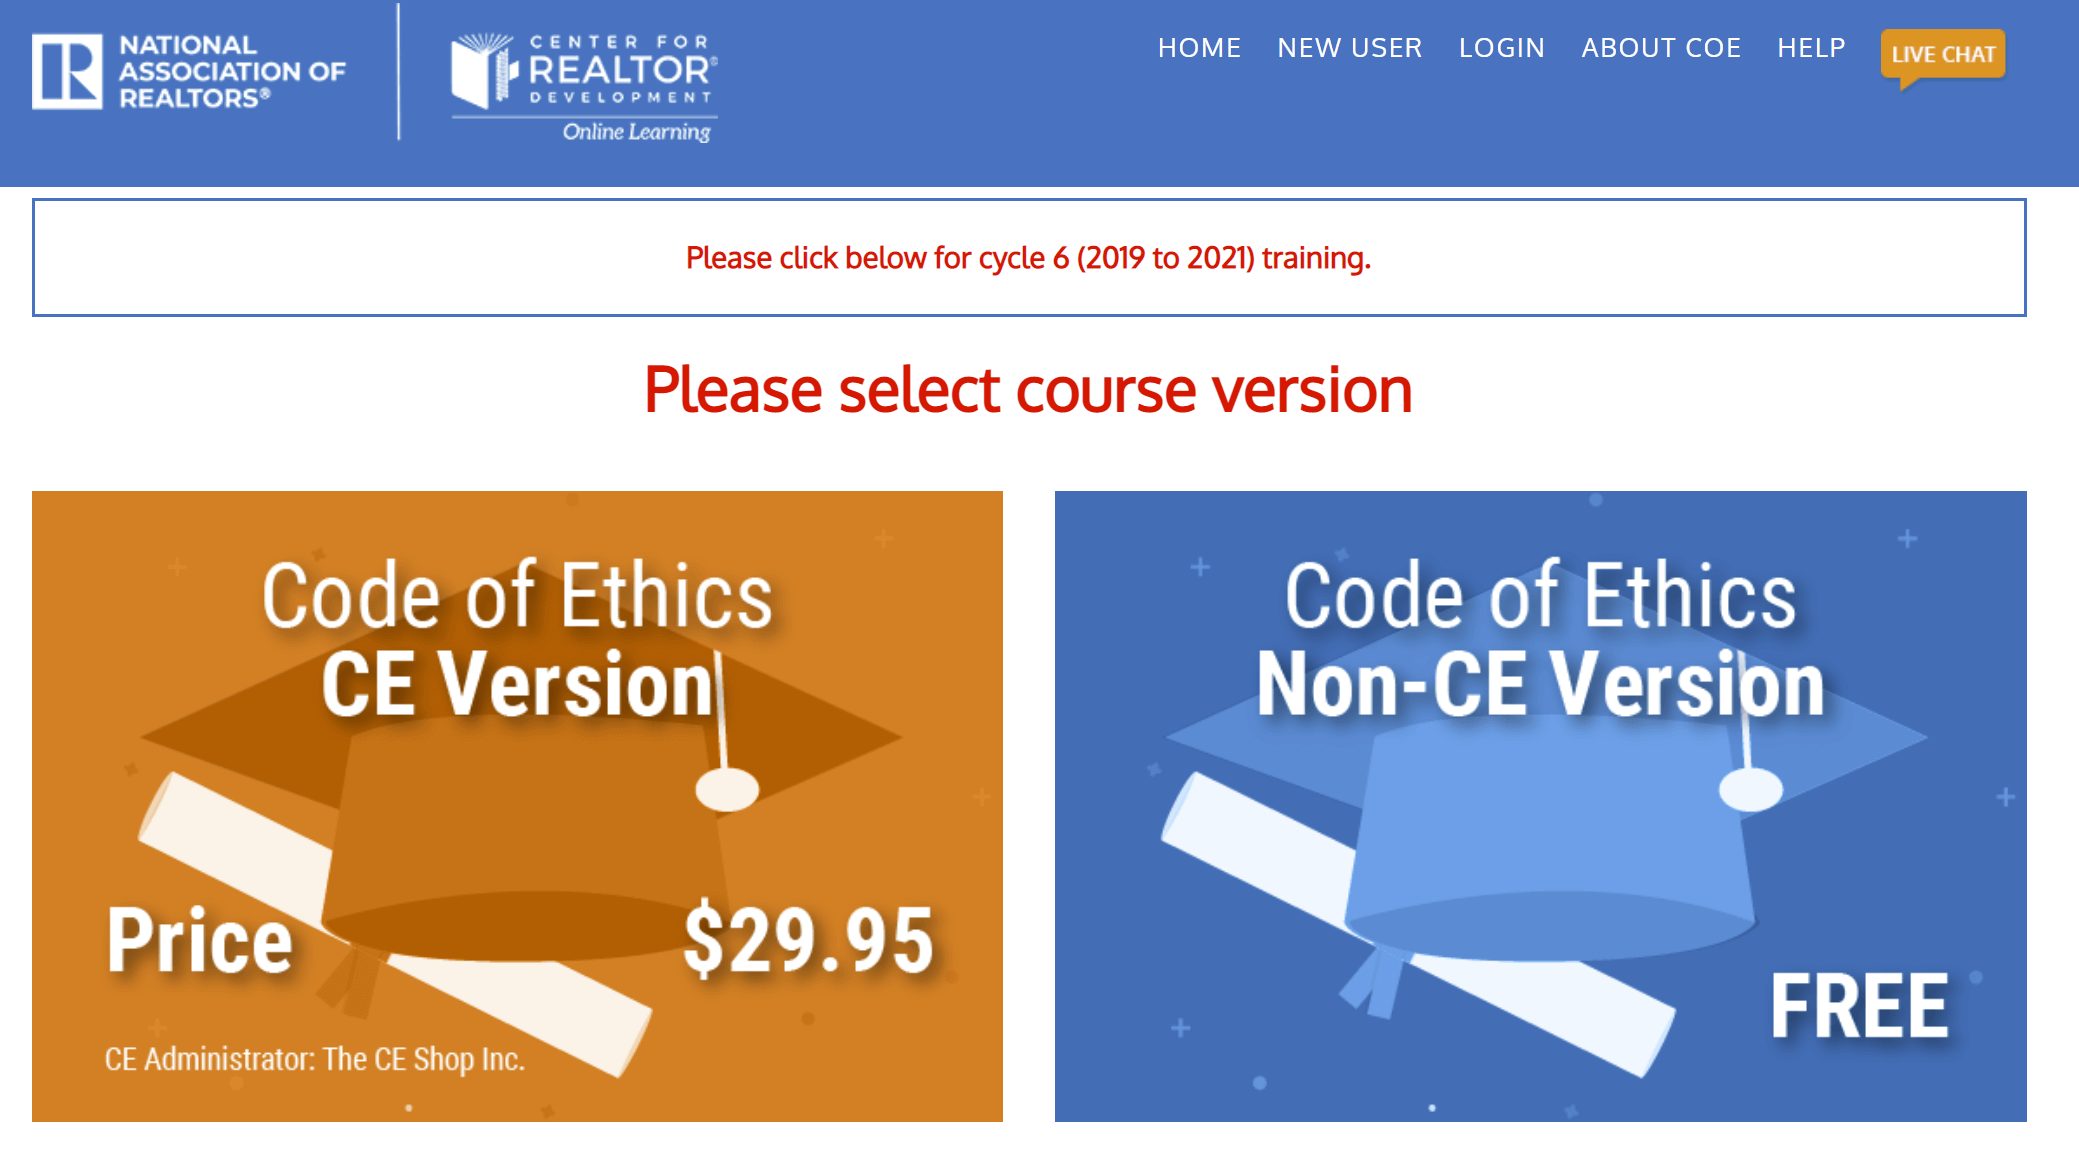 National Association of Realtors: Official Code of Ethics Online Training Overview